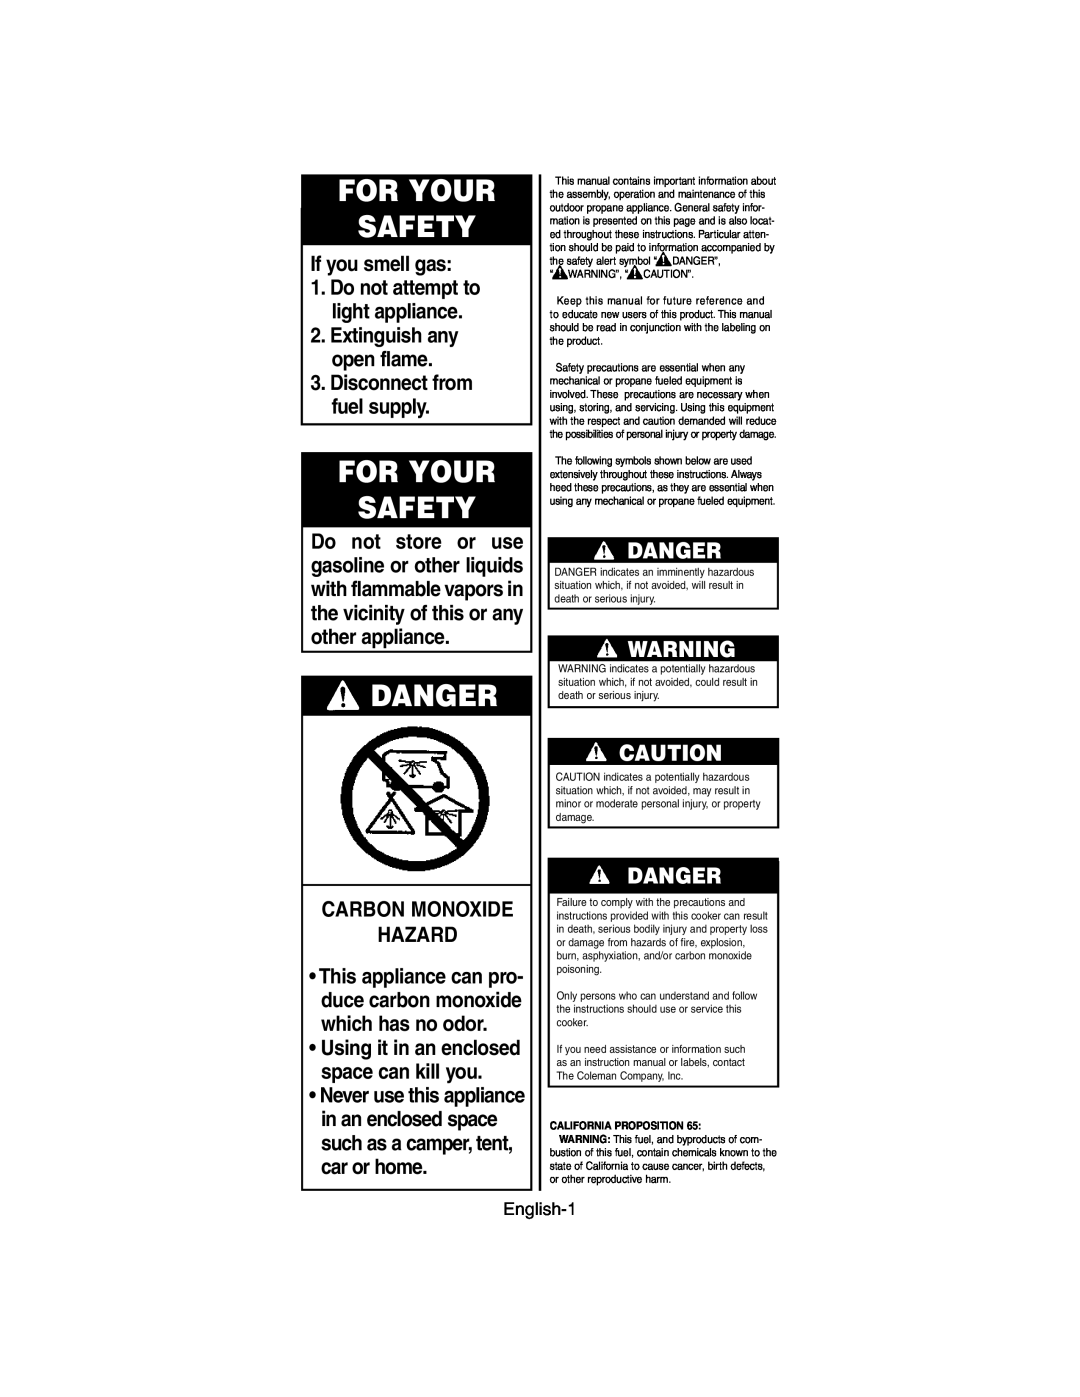 Coleman 9935 series Danger, English-1, For Your Safety, If you smell gas, Carbon Monoxide Hazard, California Proposition 